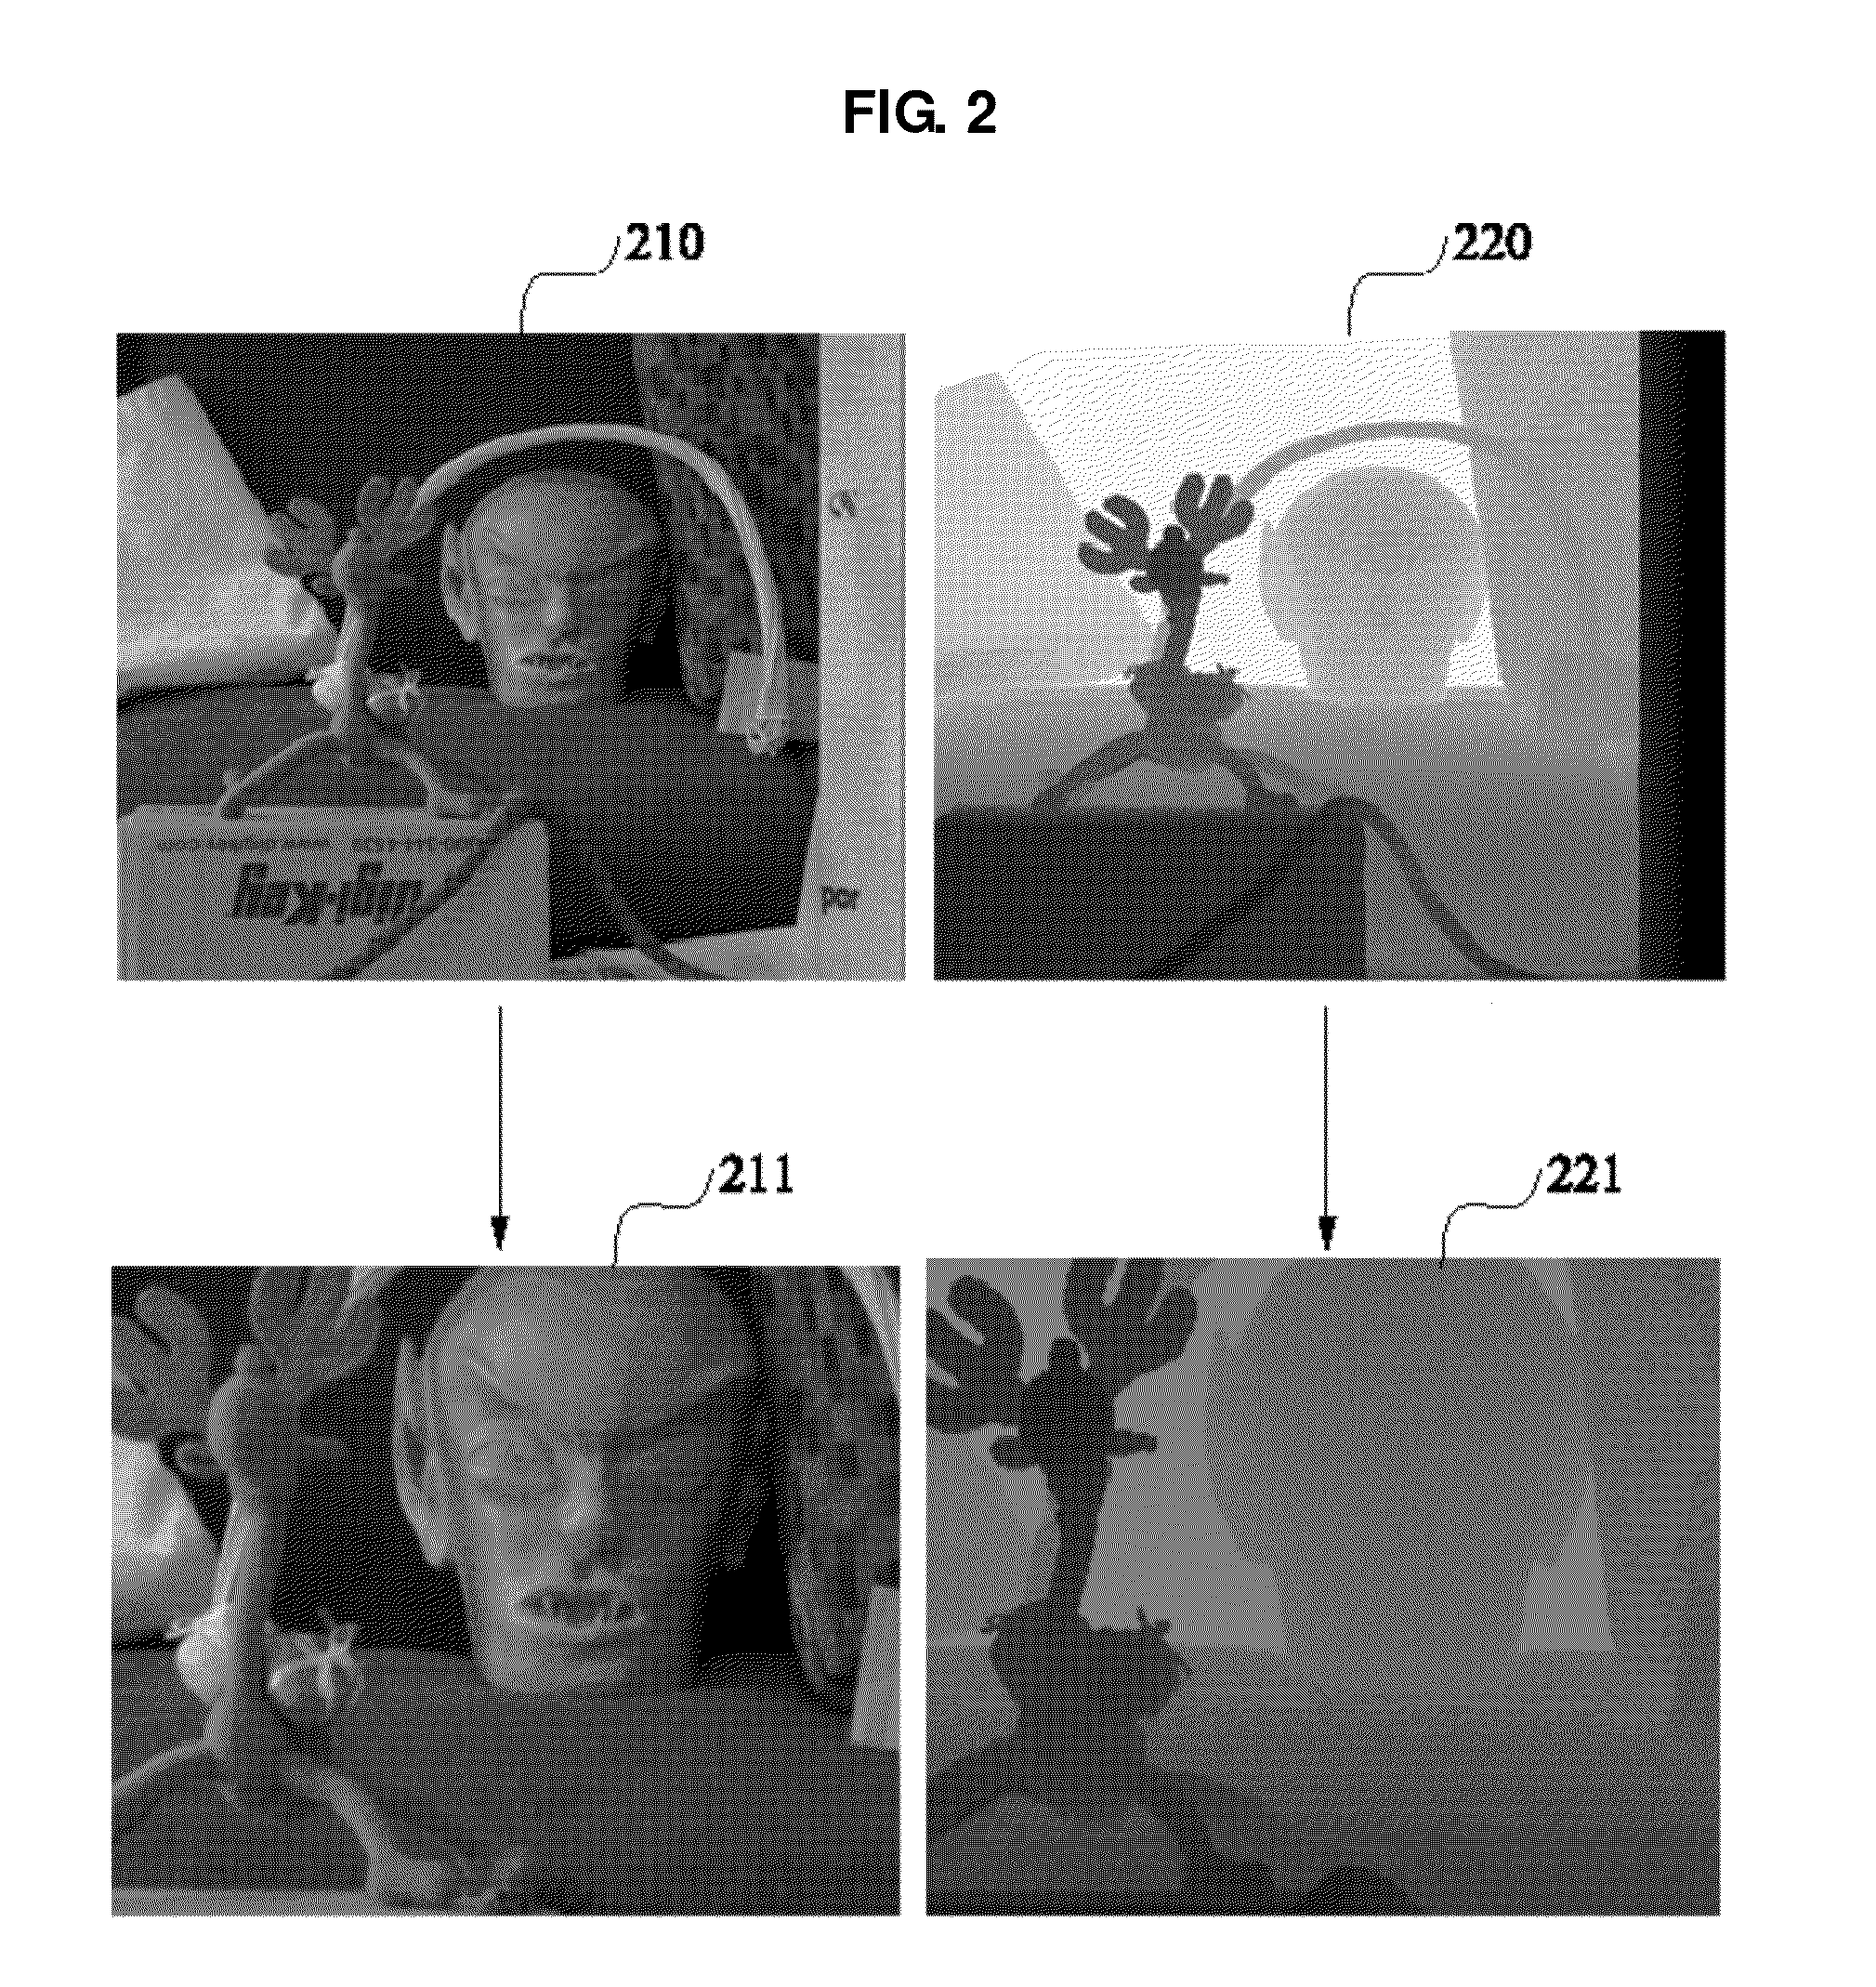 Image processing apparatus and method for three-dimensional image zoom